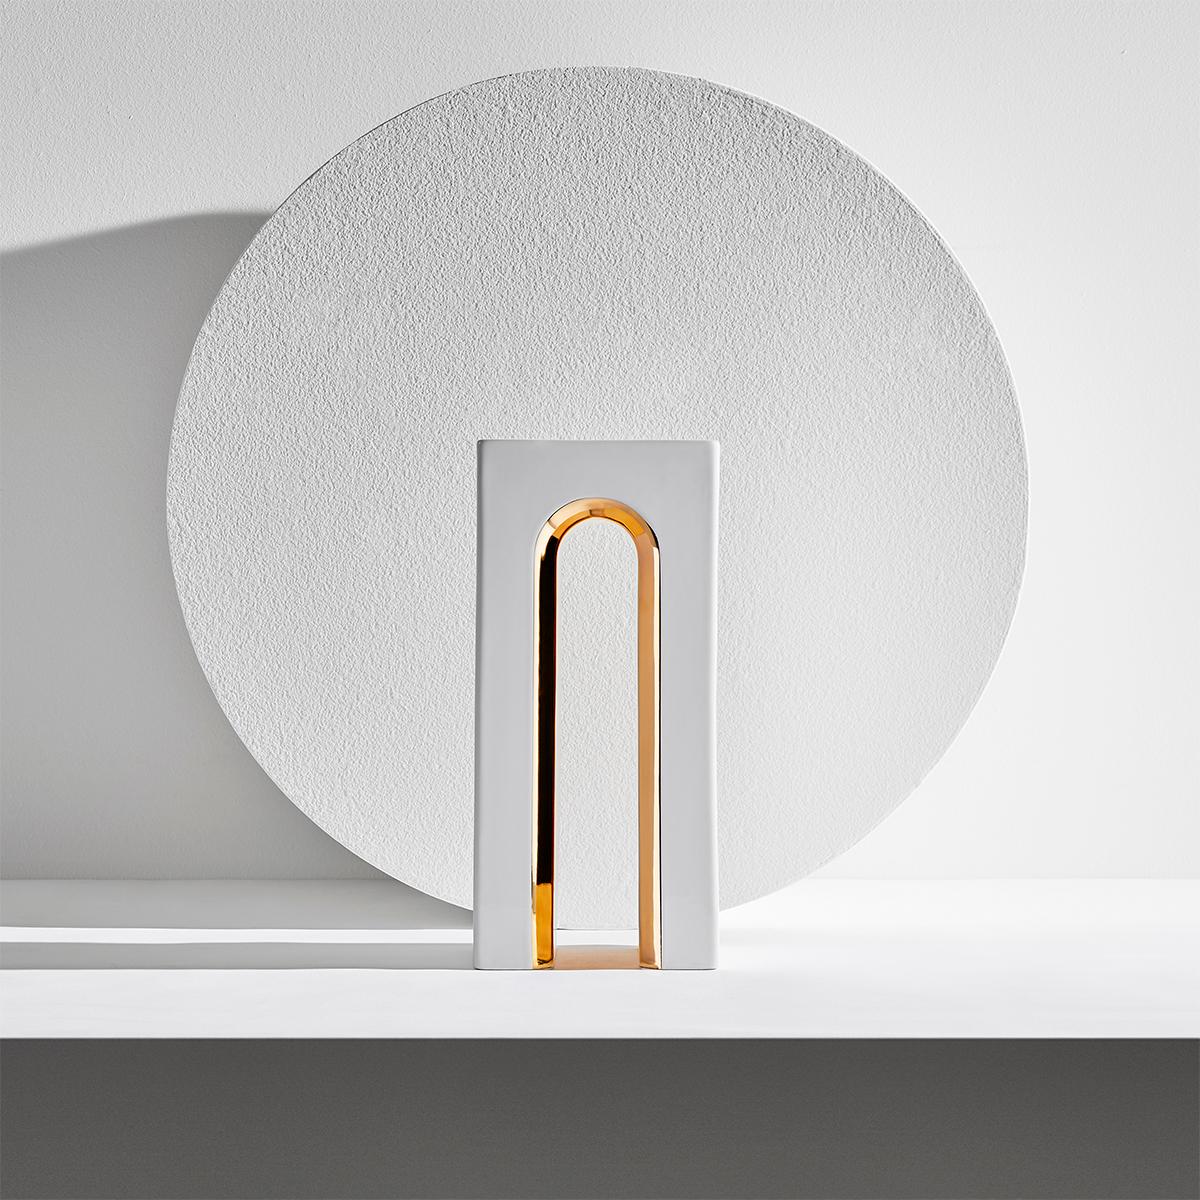 Marcello flower vase by LATOxLATO is inspired by the classical Italian architectural elegance and it is made of white ceramic with luxurious details in 24-karat gold that highlight its tall arch shape. Its sophisticated silhouette can be